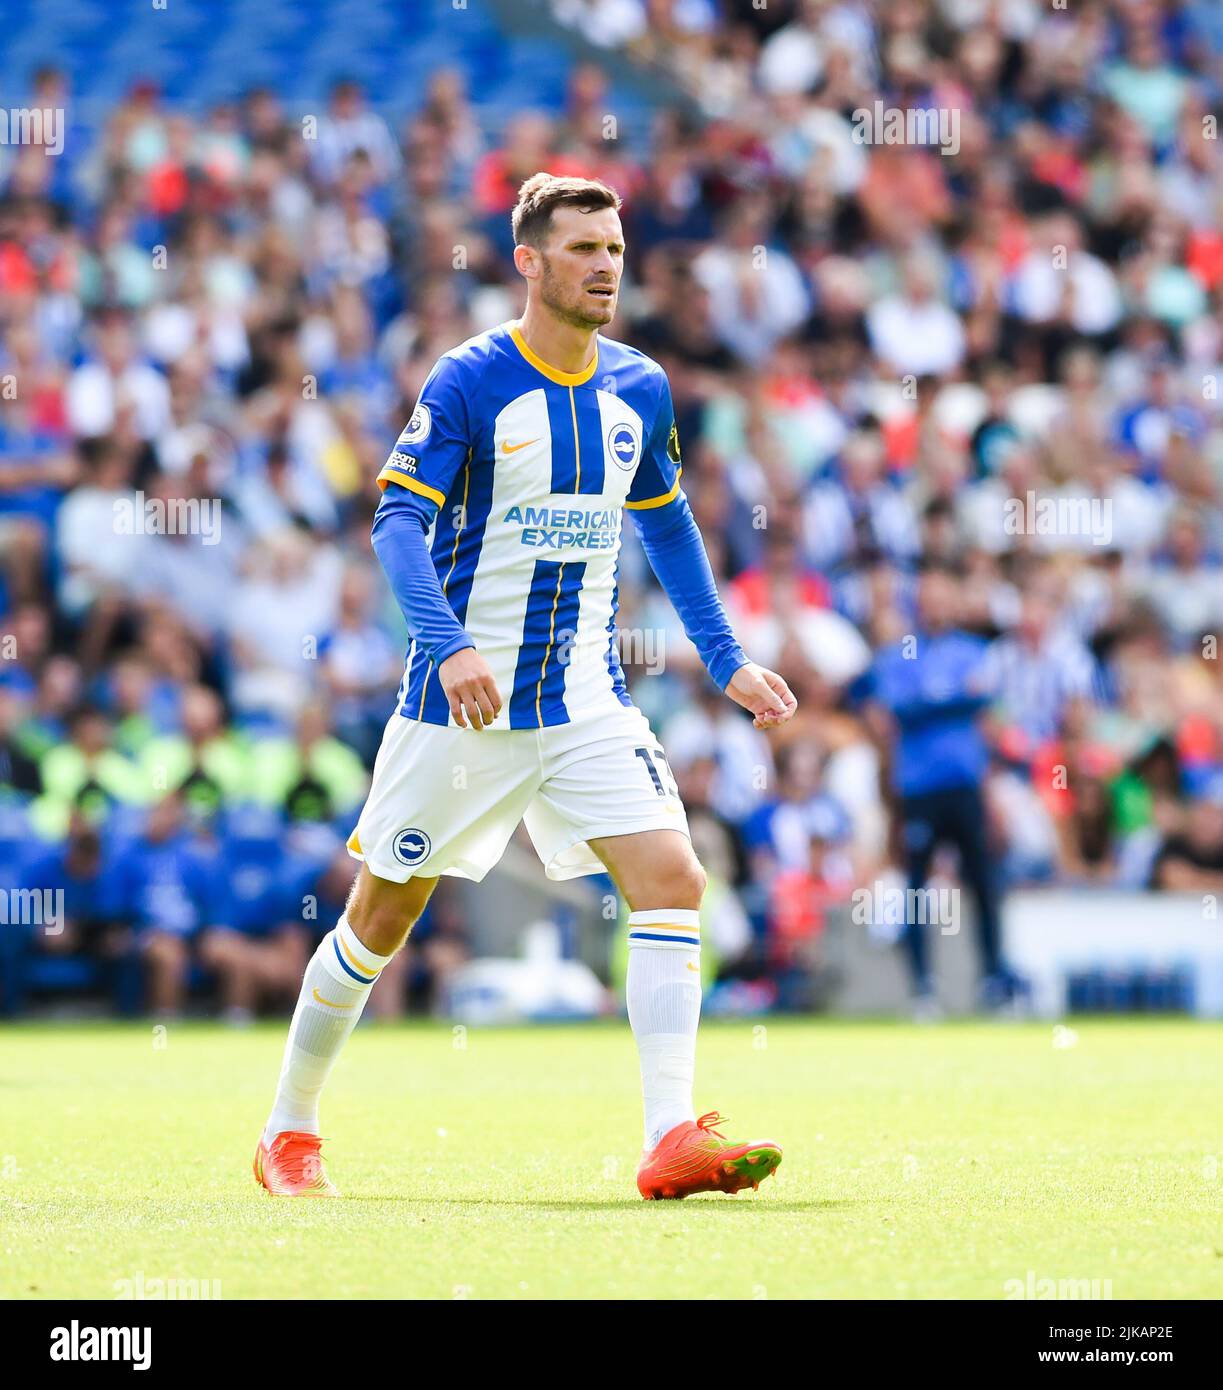 Pascal Gross of Brighton during the Pre Season friendly match between Brighton and Hove Albion and Espanyol at  the American Express Community Stadium, Brighton, UK - 30th July 2022  Editorial use only. No merchandising. For Football images FA and Premier League restrictions apply inc. no internet/mobile usage without FAPL license - for details contact Football Dataco Stock Photo